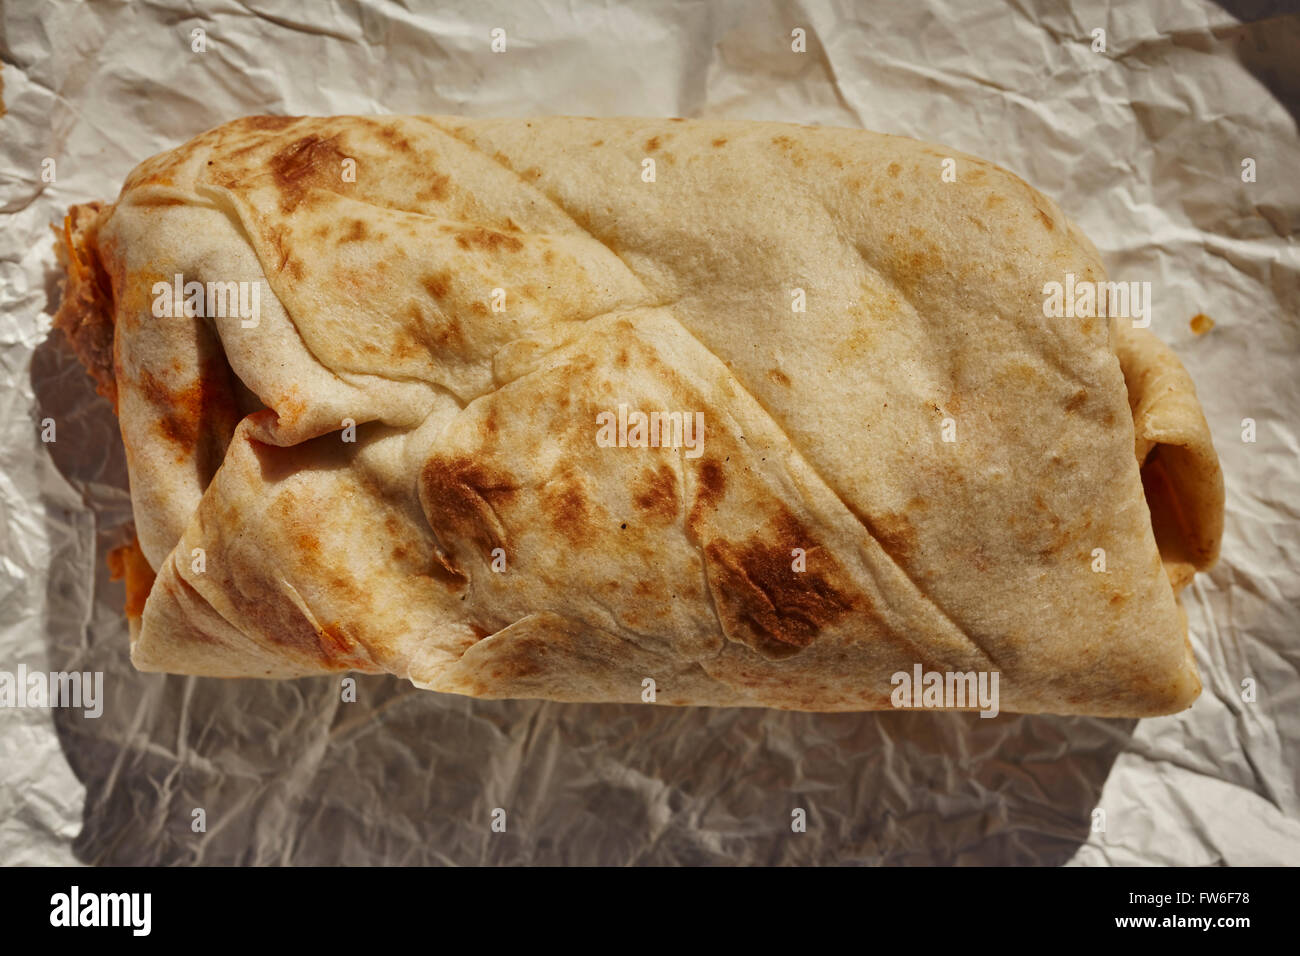 chicharrón filled burrito in the New Mexico style served at Abiquiu, NM, USA Stock Photo